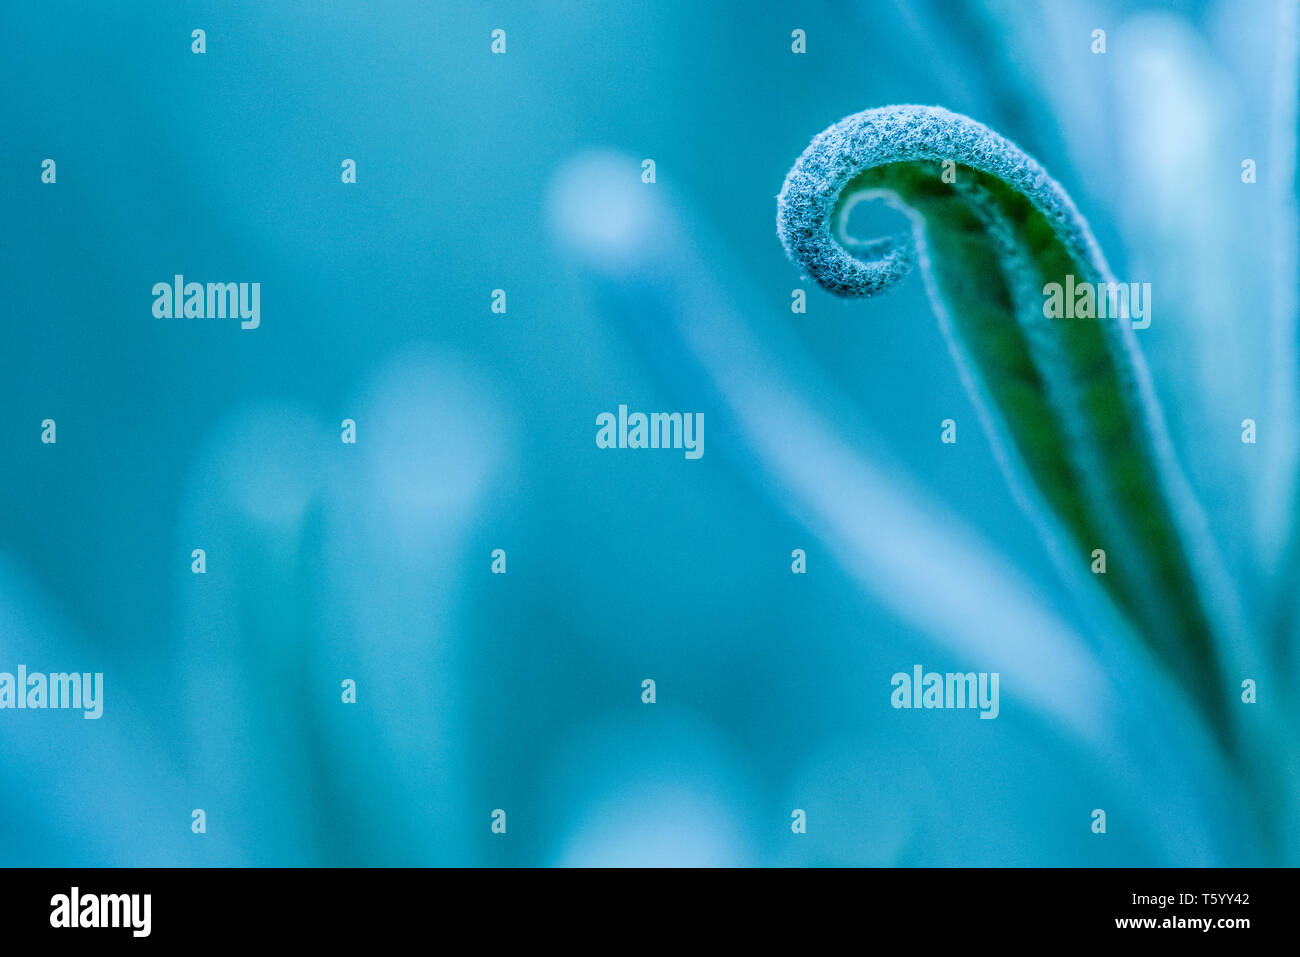 A curling lavender leaf on the right, in the foreground, fading into an abstract blue background Stock Photo